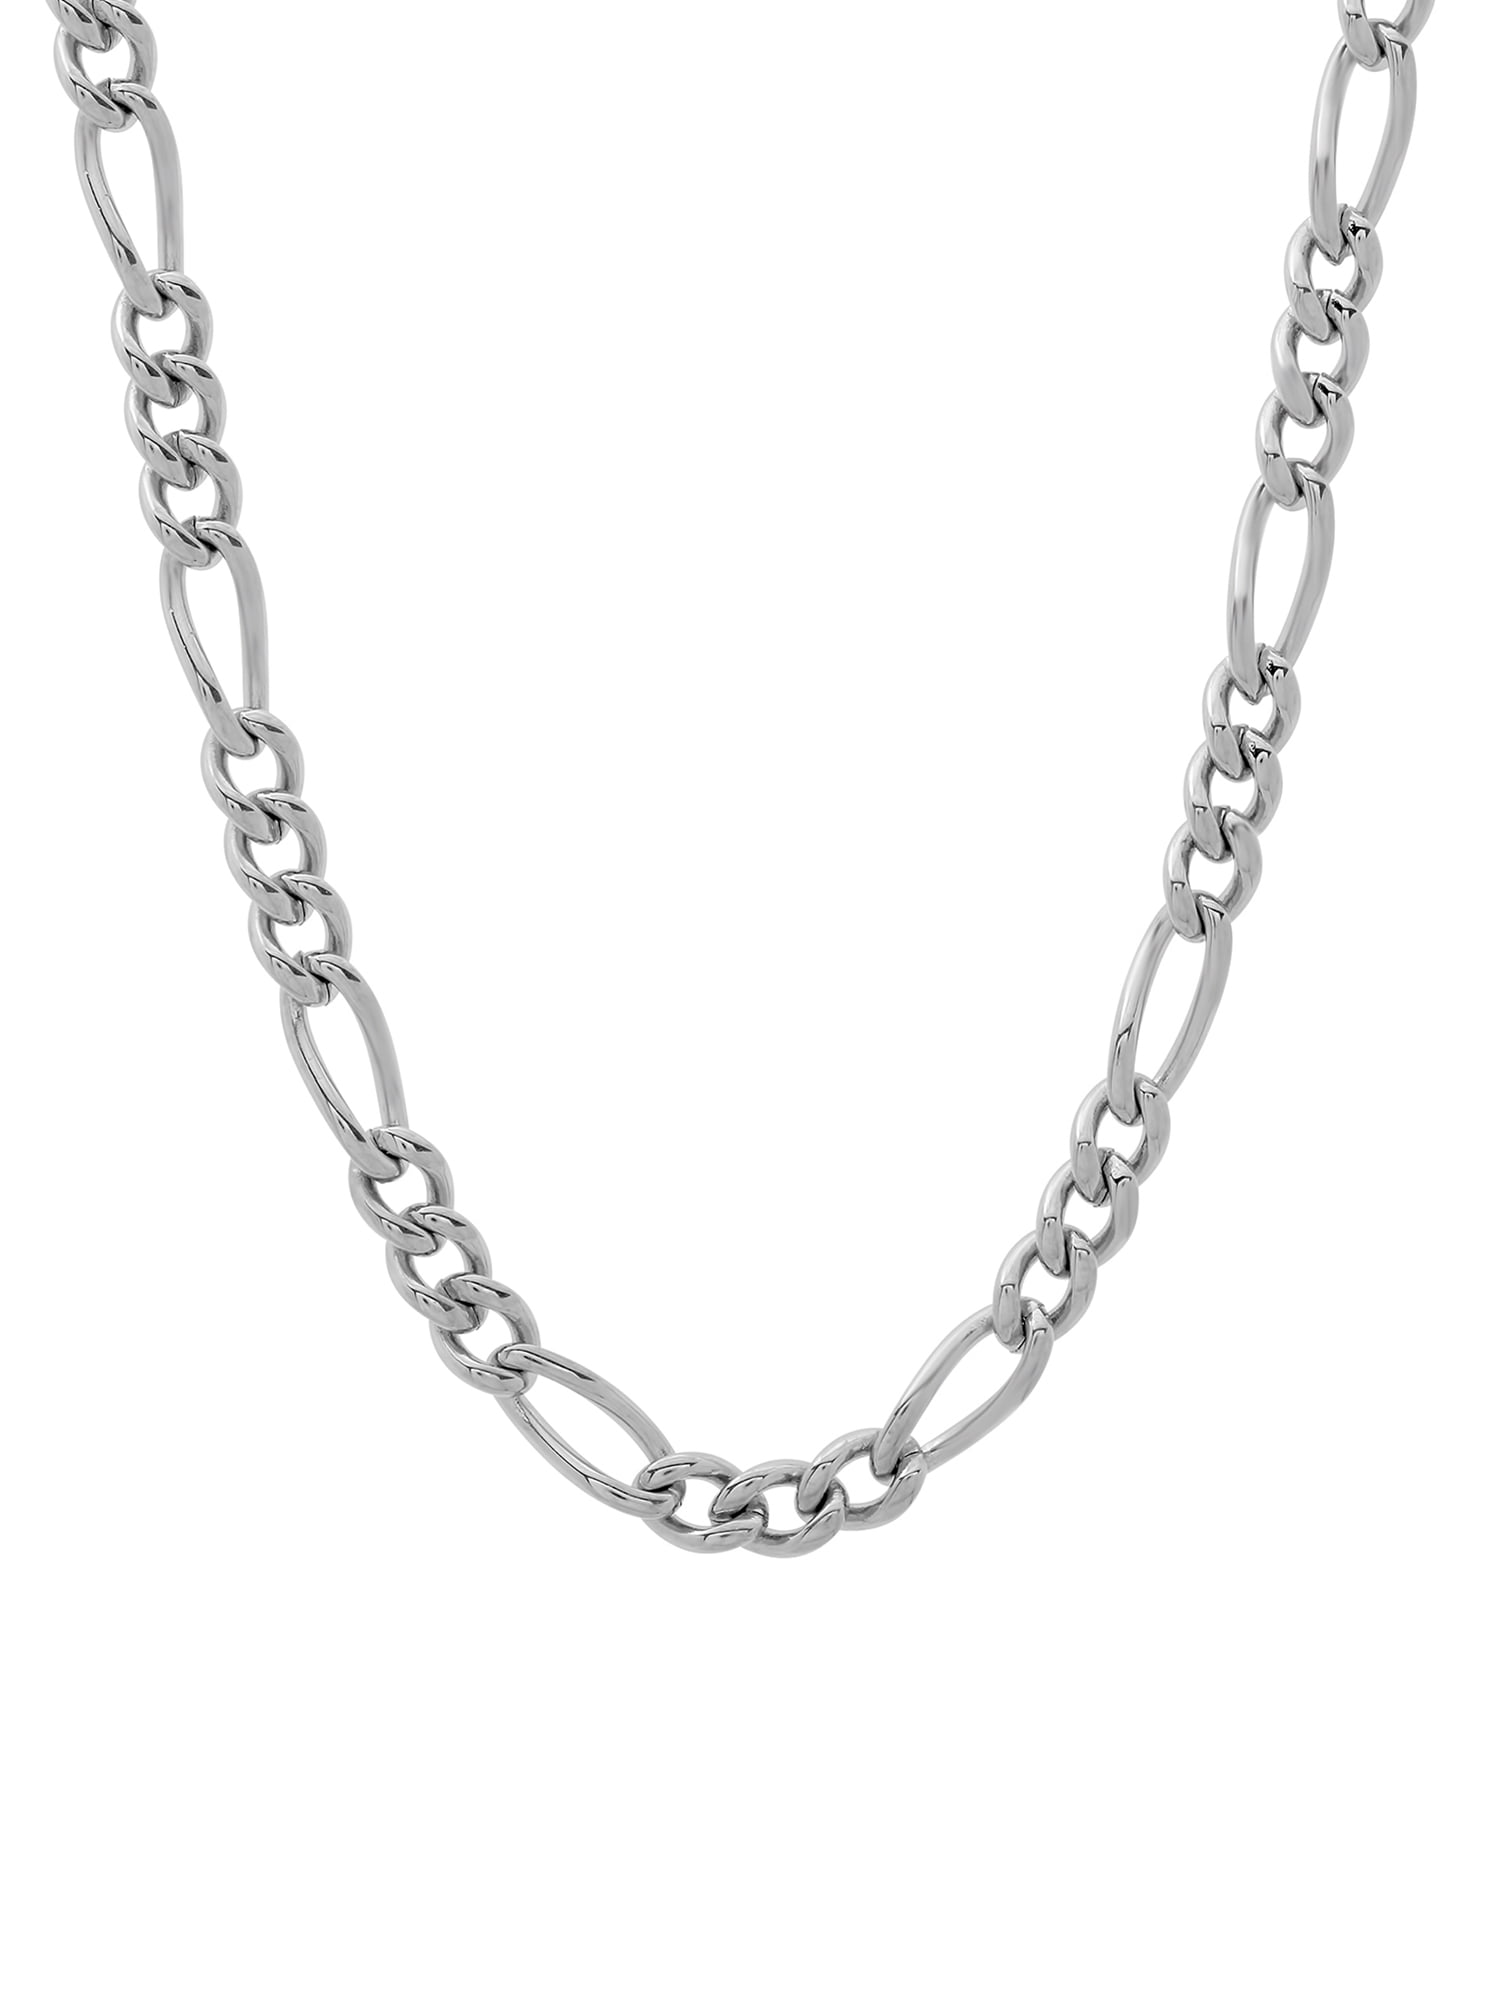 30"MEN's Stainless Steel 5mm Silver Smooth Box Link Chain Necklace Pendant*A 